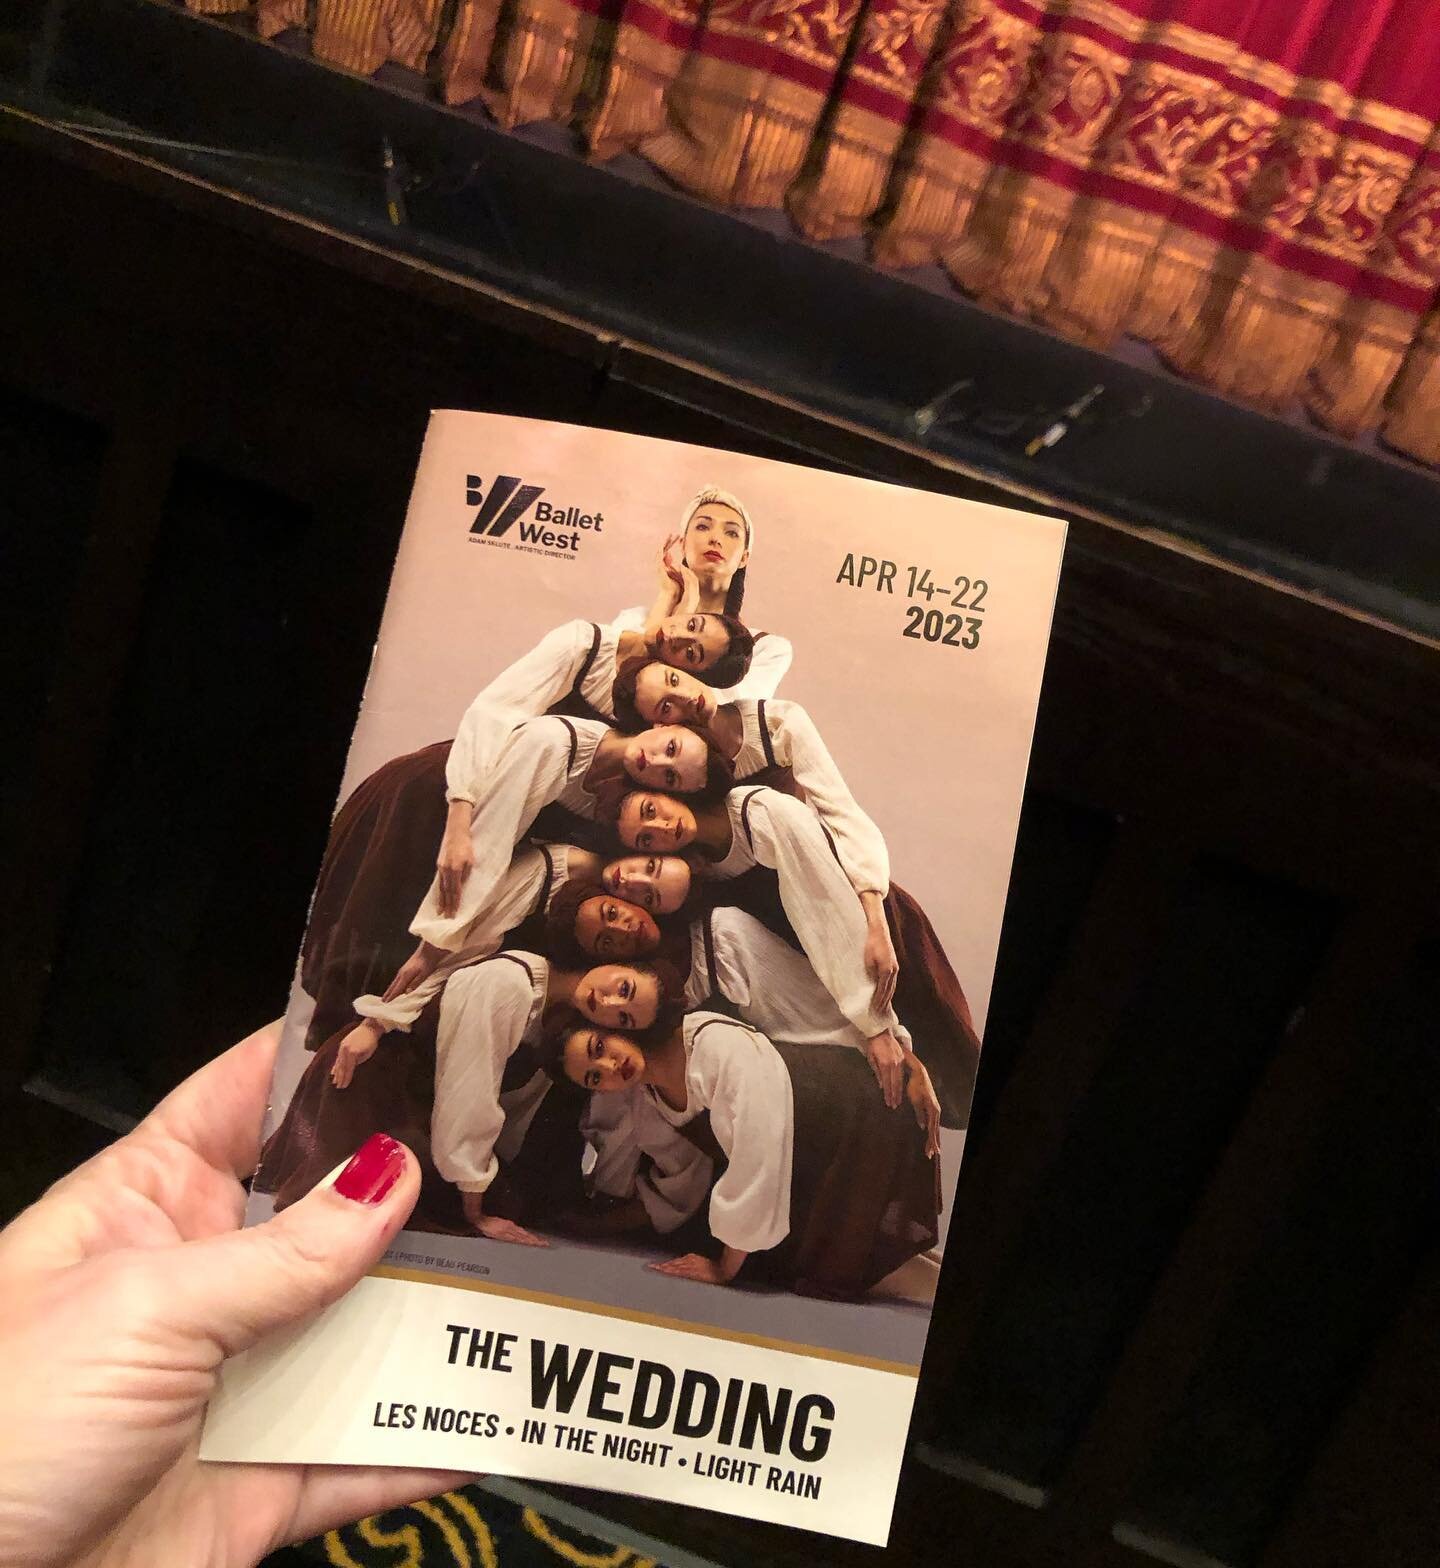 Friday night was Ballet West&rsquo;s opening of The Wedding. These three short pieces were each unique, heartfelt, artistically amazing, inspiring, athletic, and incredible. 

That any artistic company can survive (and thrive!) is no small thing. Bal